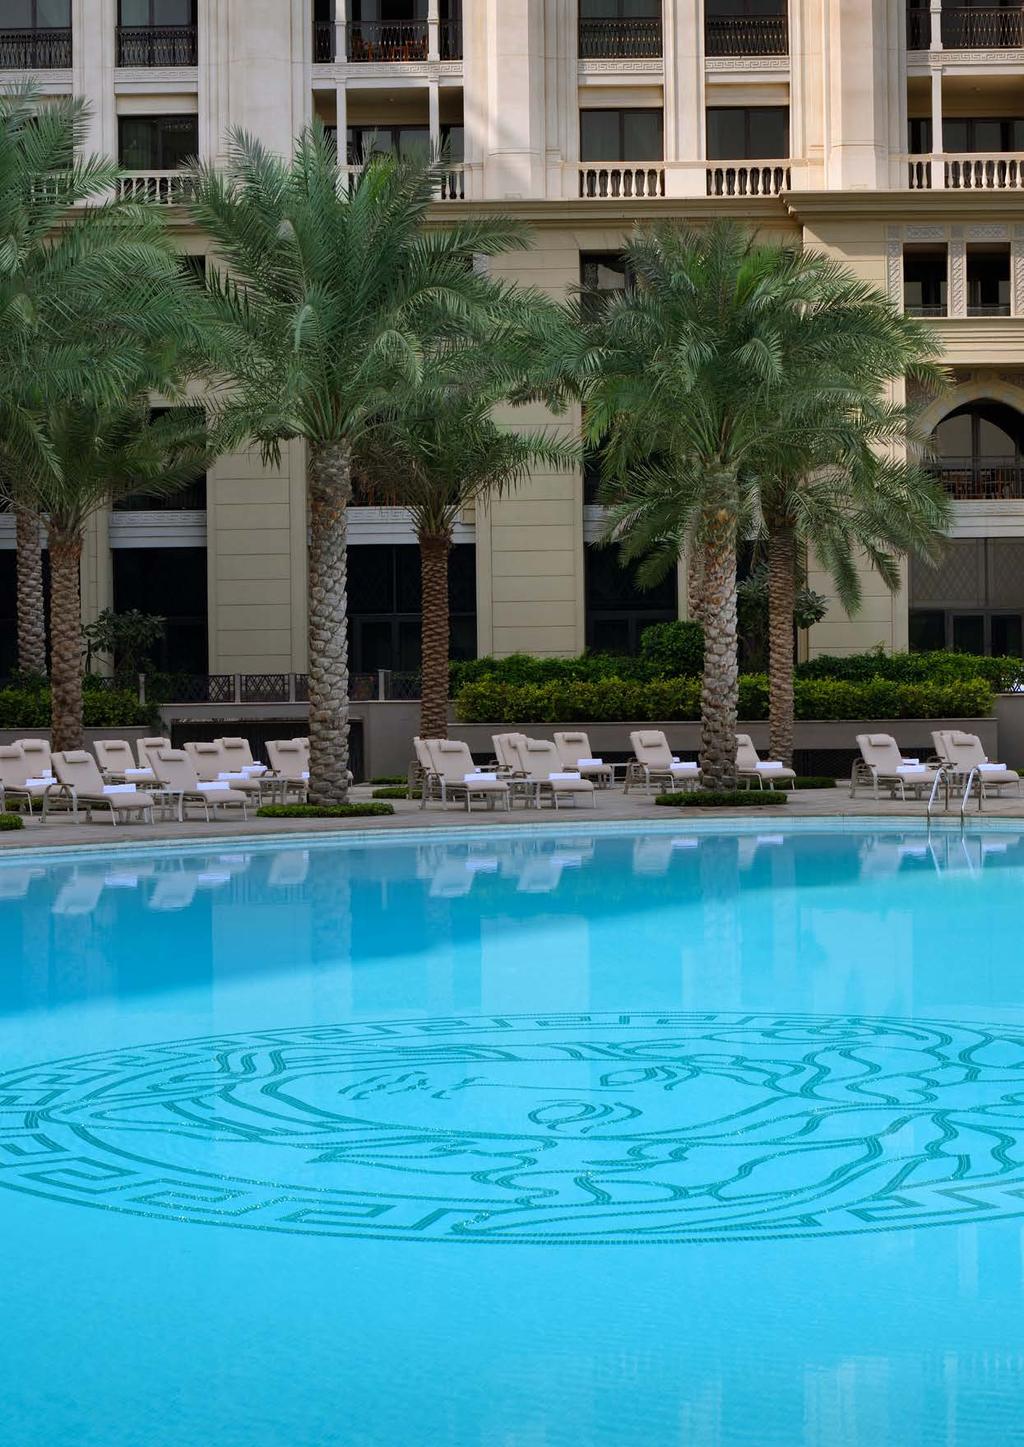 Rejuvenate Meander through the hotel s lush gardens featuring three outdoor pools with scenic views of the Dubai Creek.